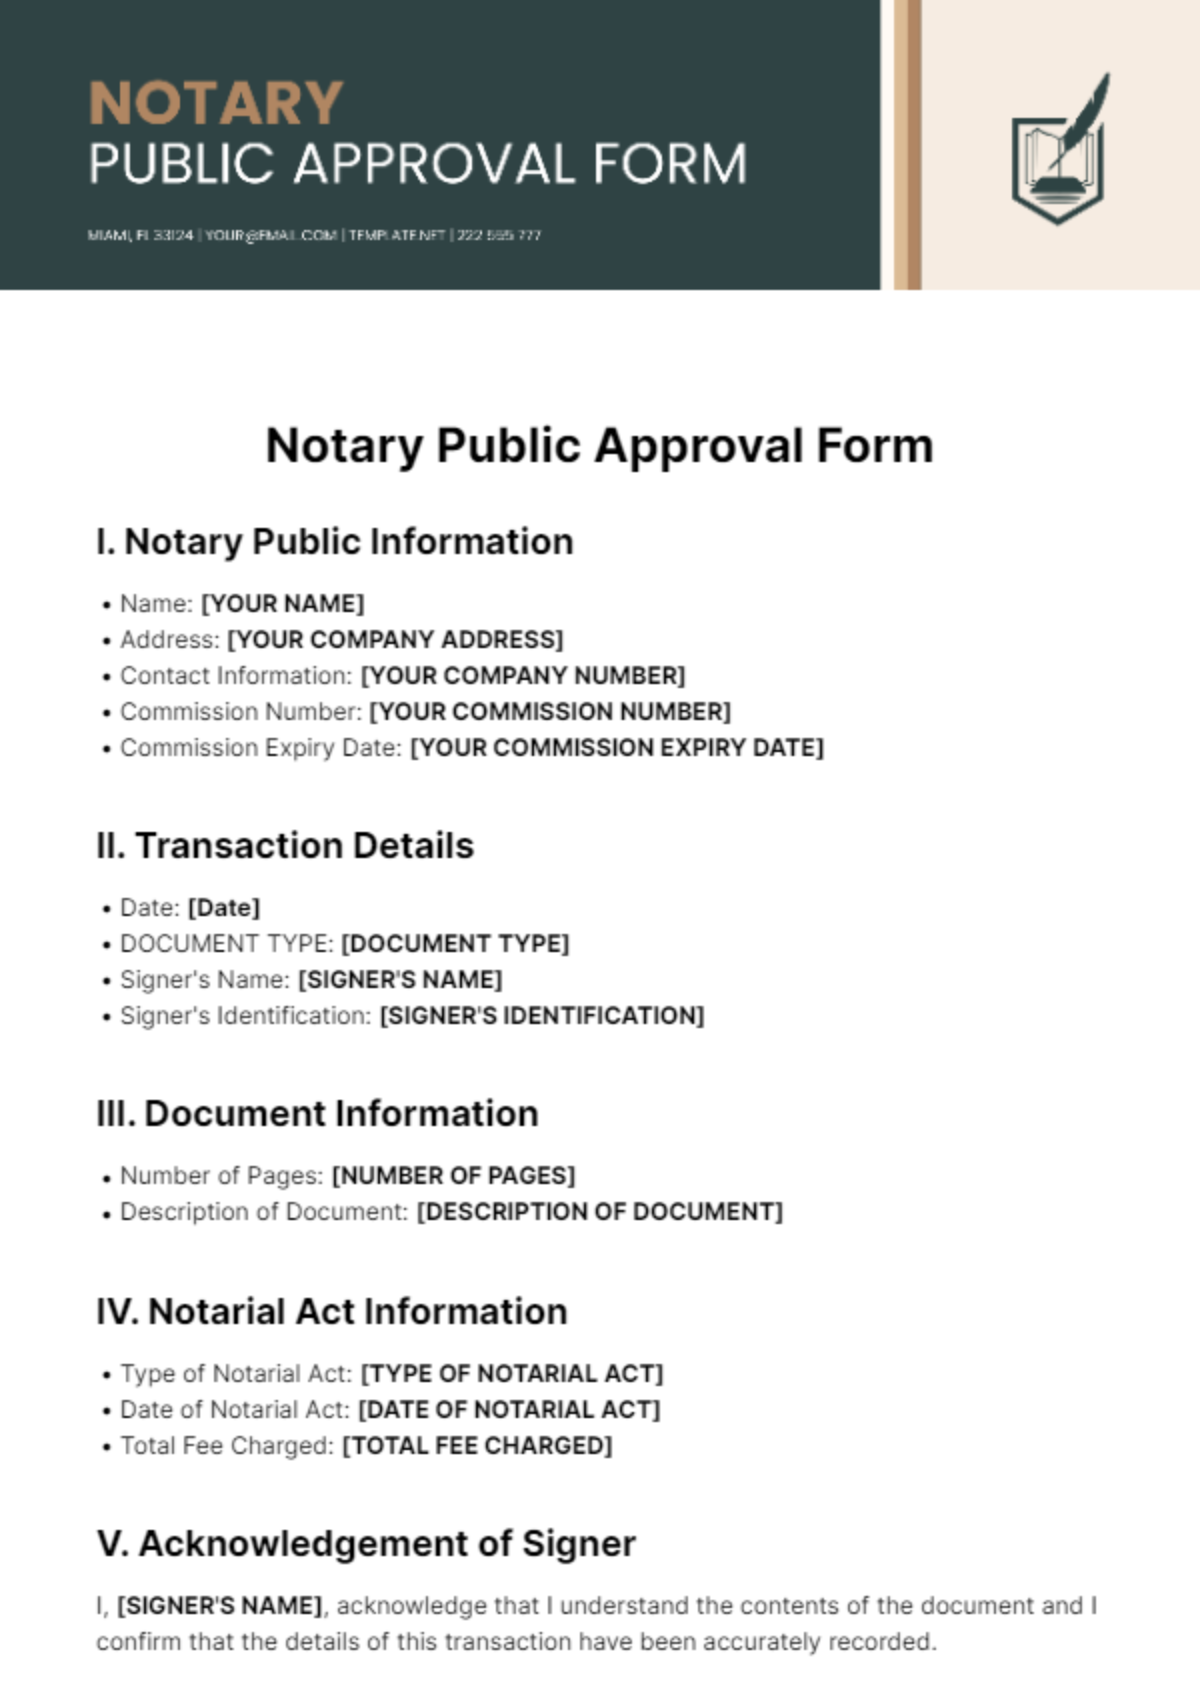 Free Notary Public Approval Form Template